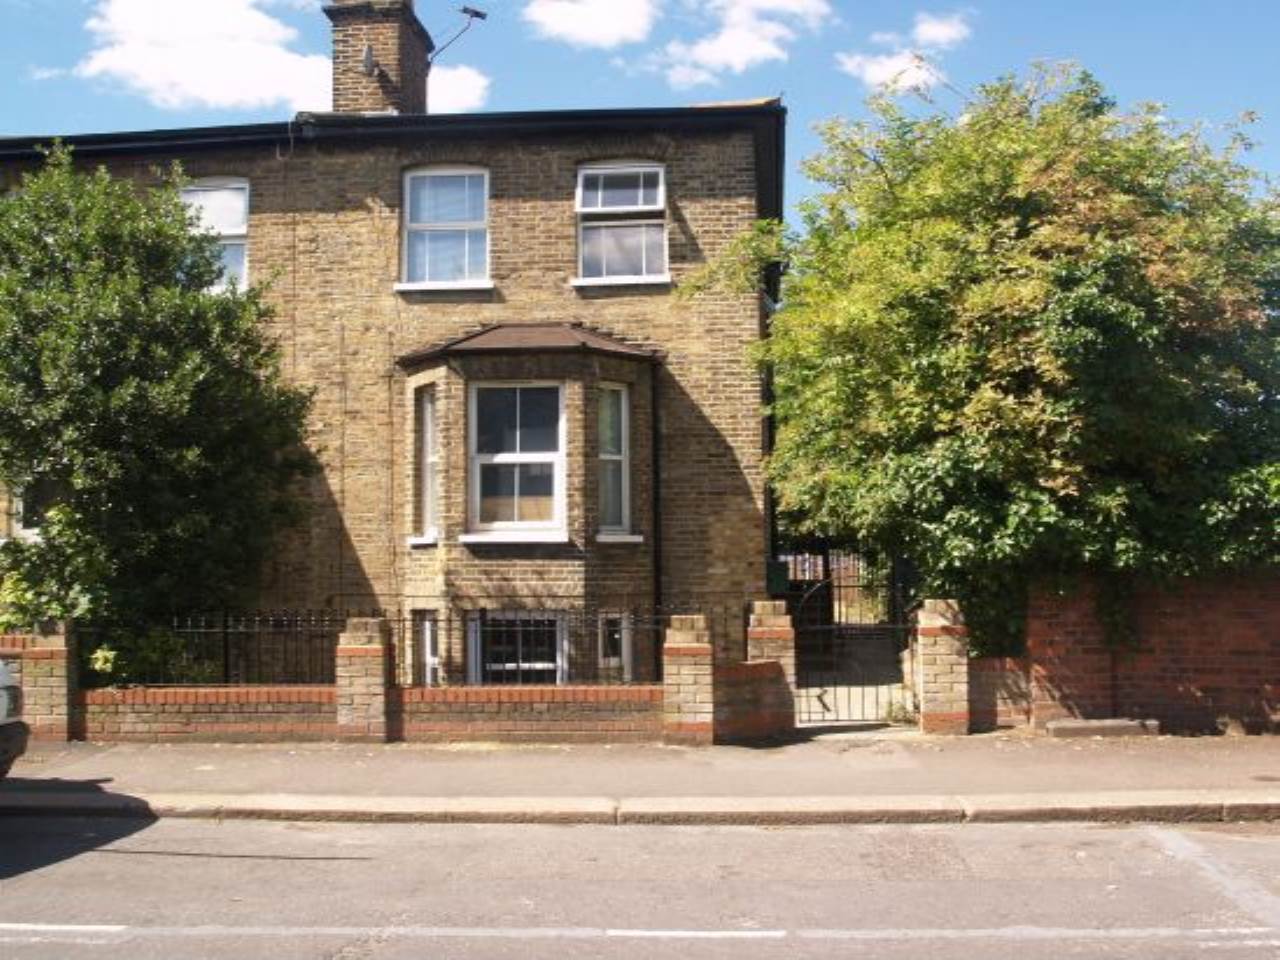 1 bed studio flat to rent in East Avenue, Walthamstow - Property Image 1